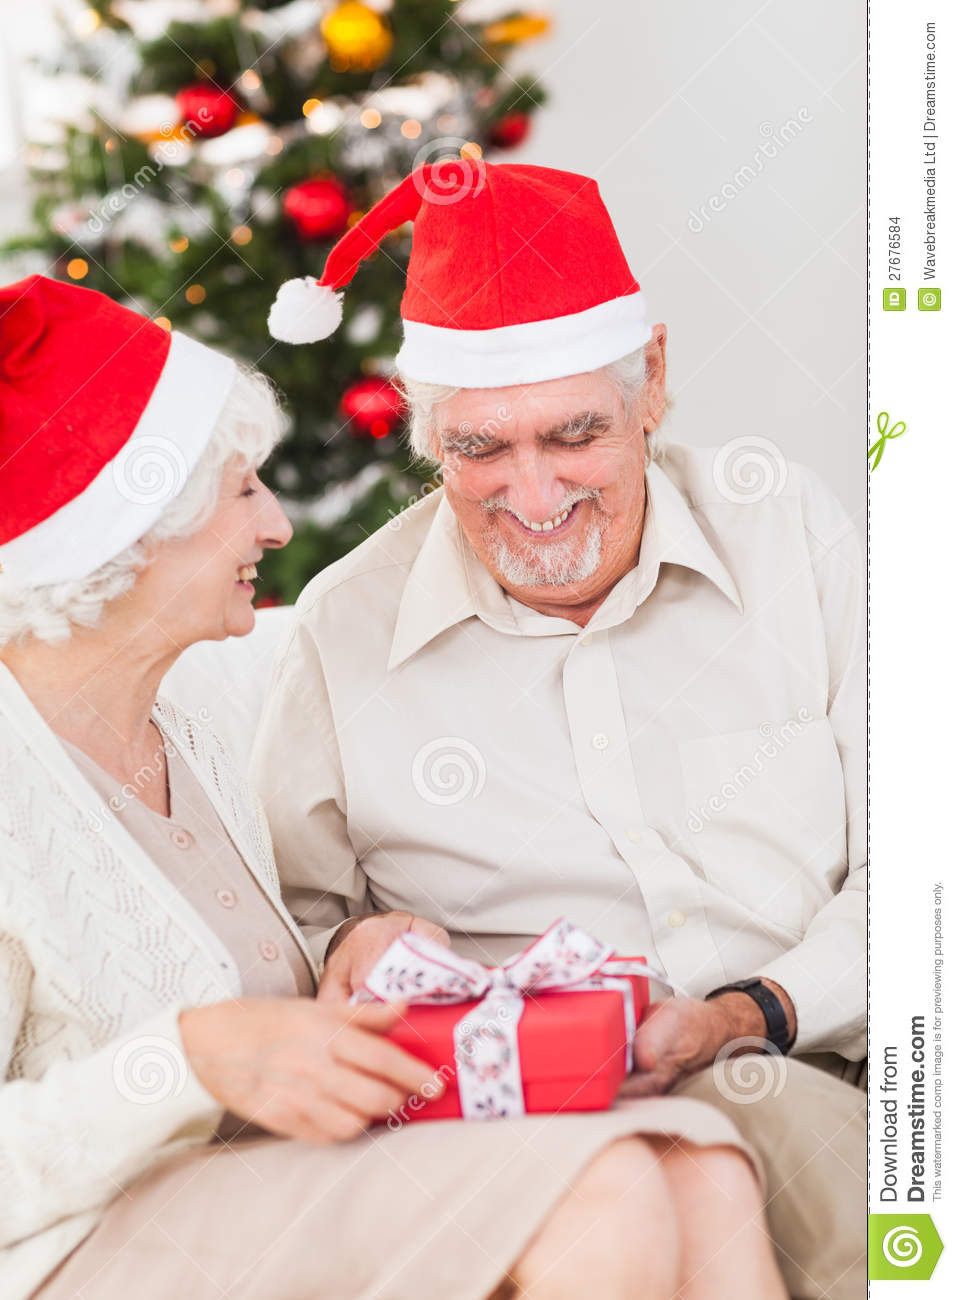 Christmas Gift Ideas For Older Couple
 Elderly Couple Swapping Christmas Presents Stock